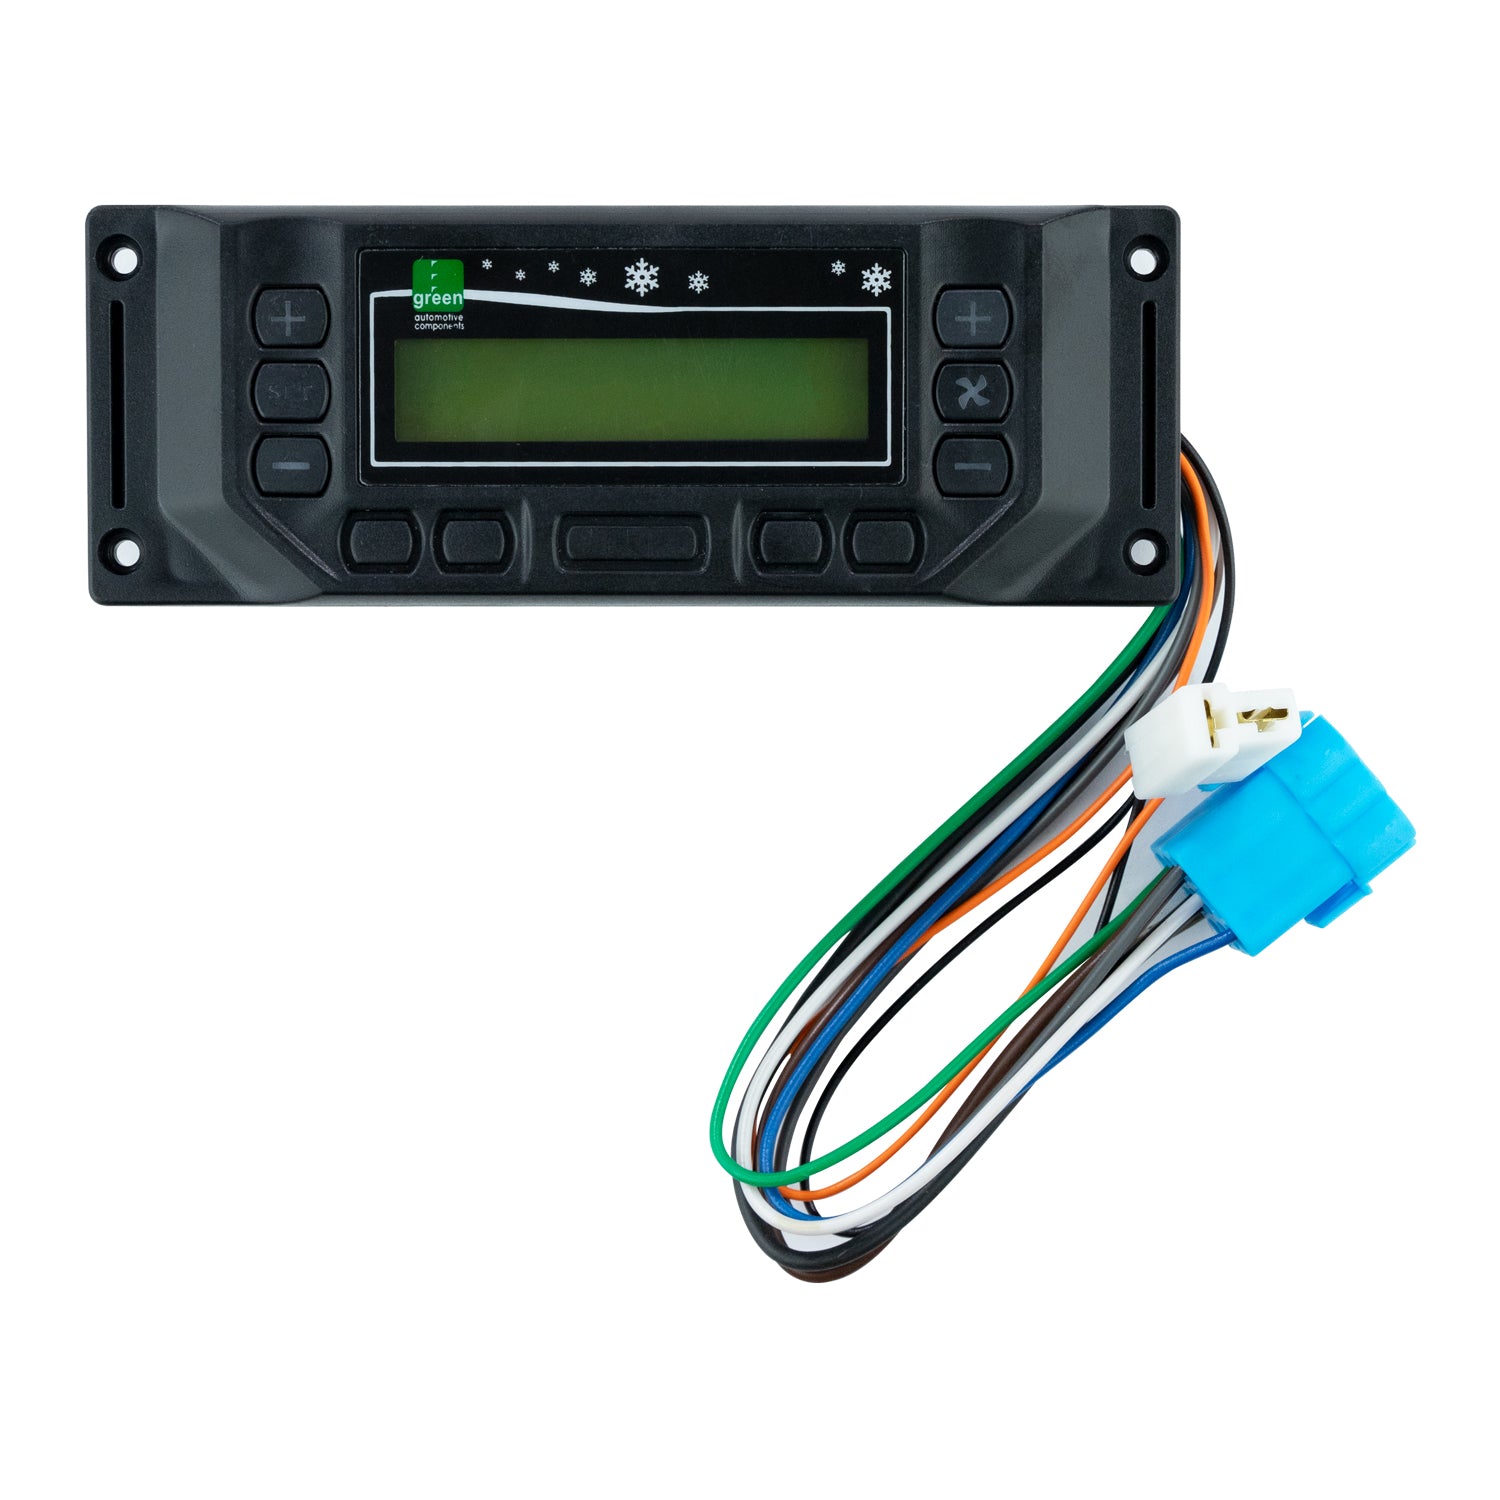 A/C Control Panel for Electric AC Compressor - Qualy Air